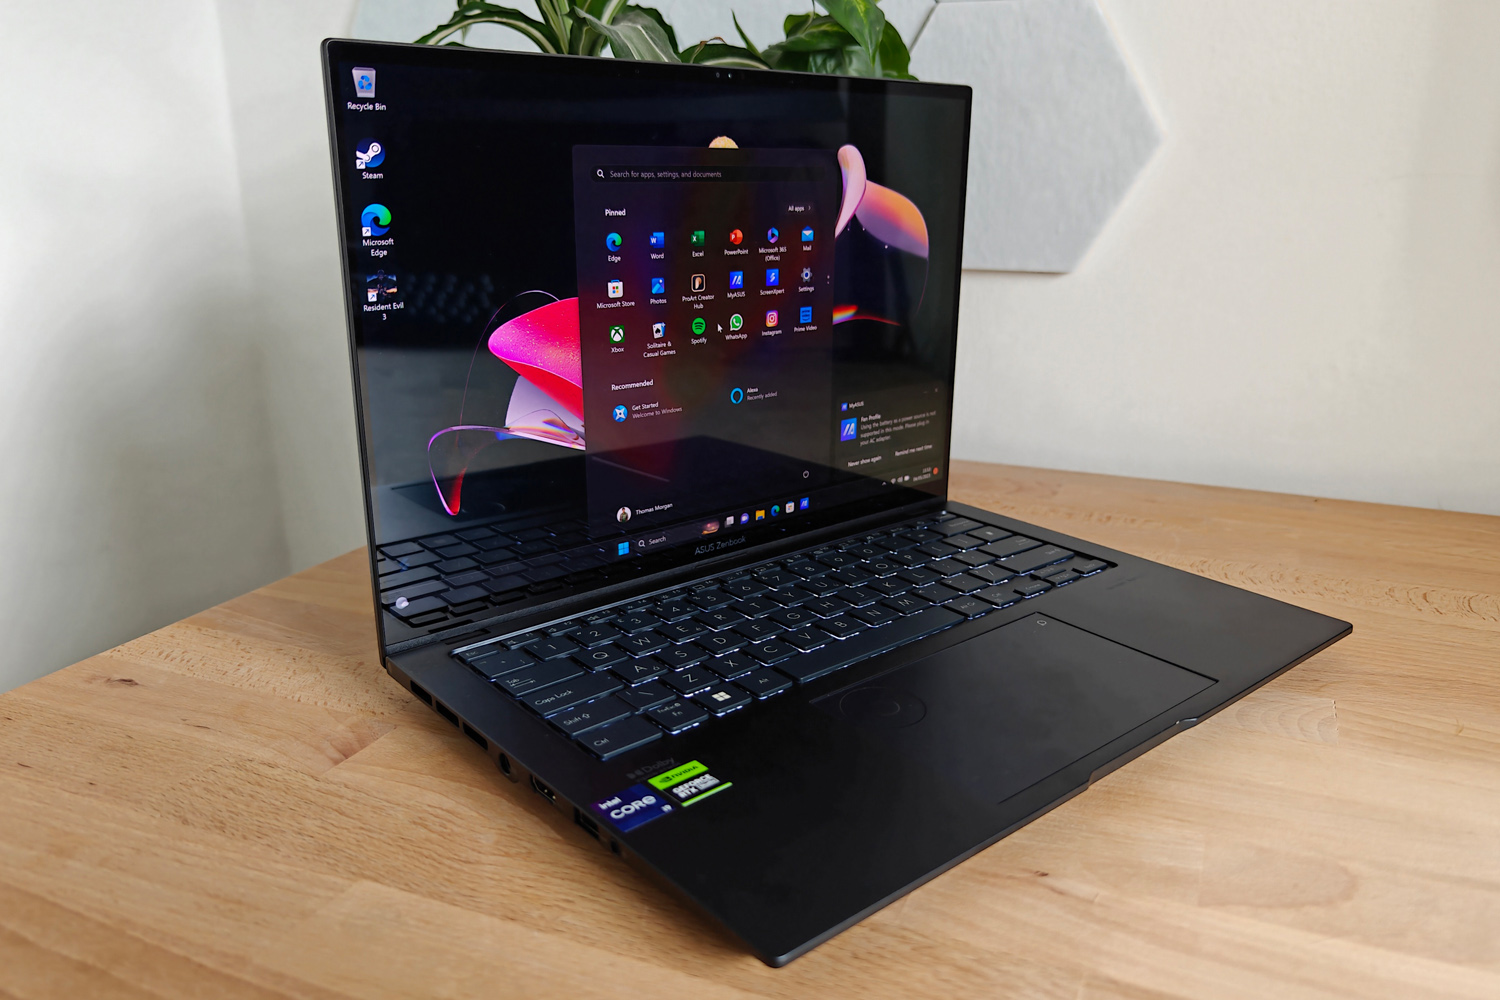 Asus Zenbook Pro 14 OLED Review: A strong claimant for the world's best  all-rounder